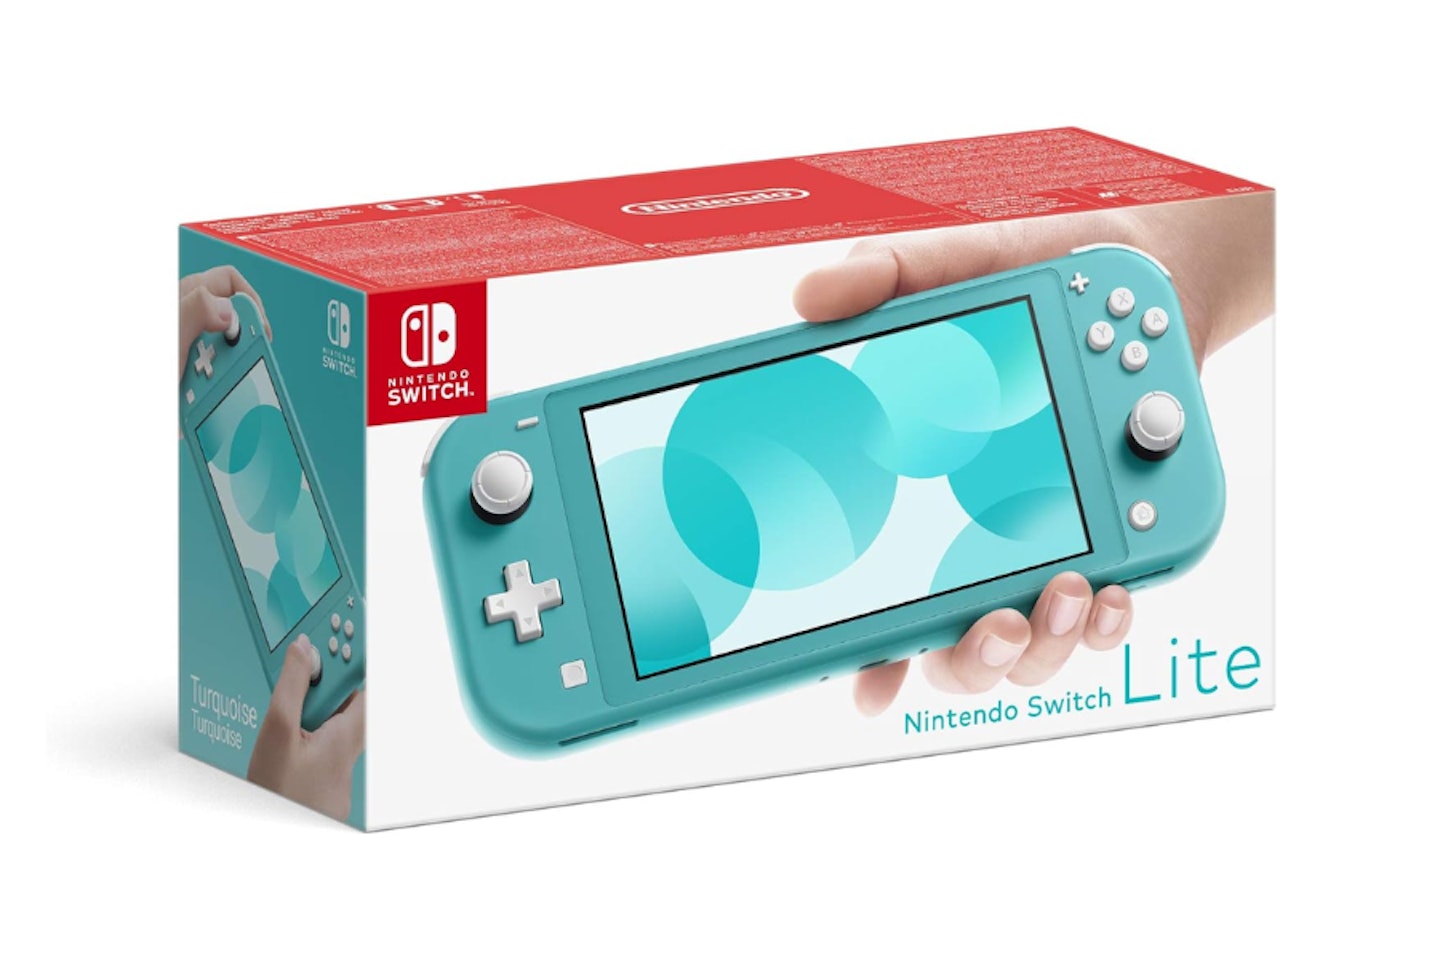 Nintendo Switch Lite -  one of the best retro handheld game consoles